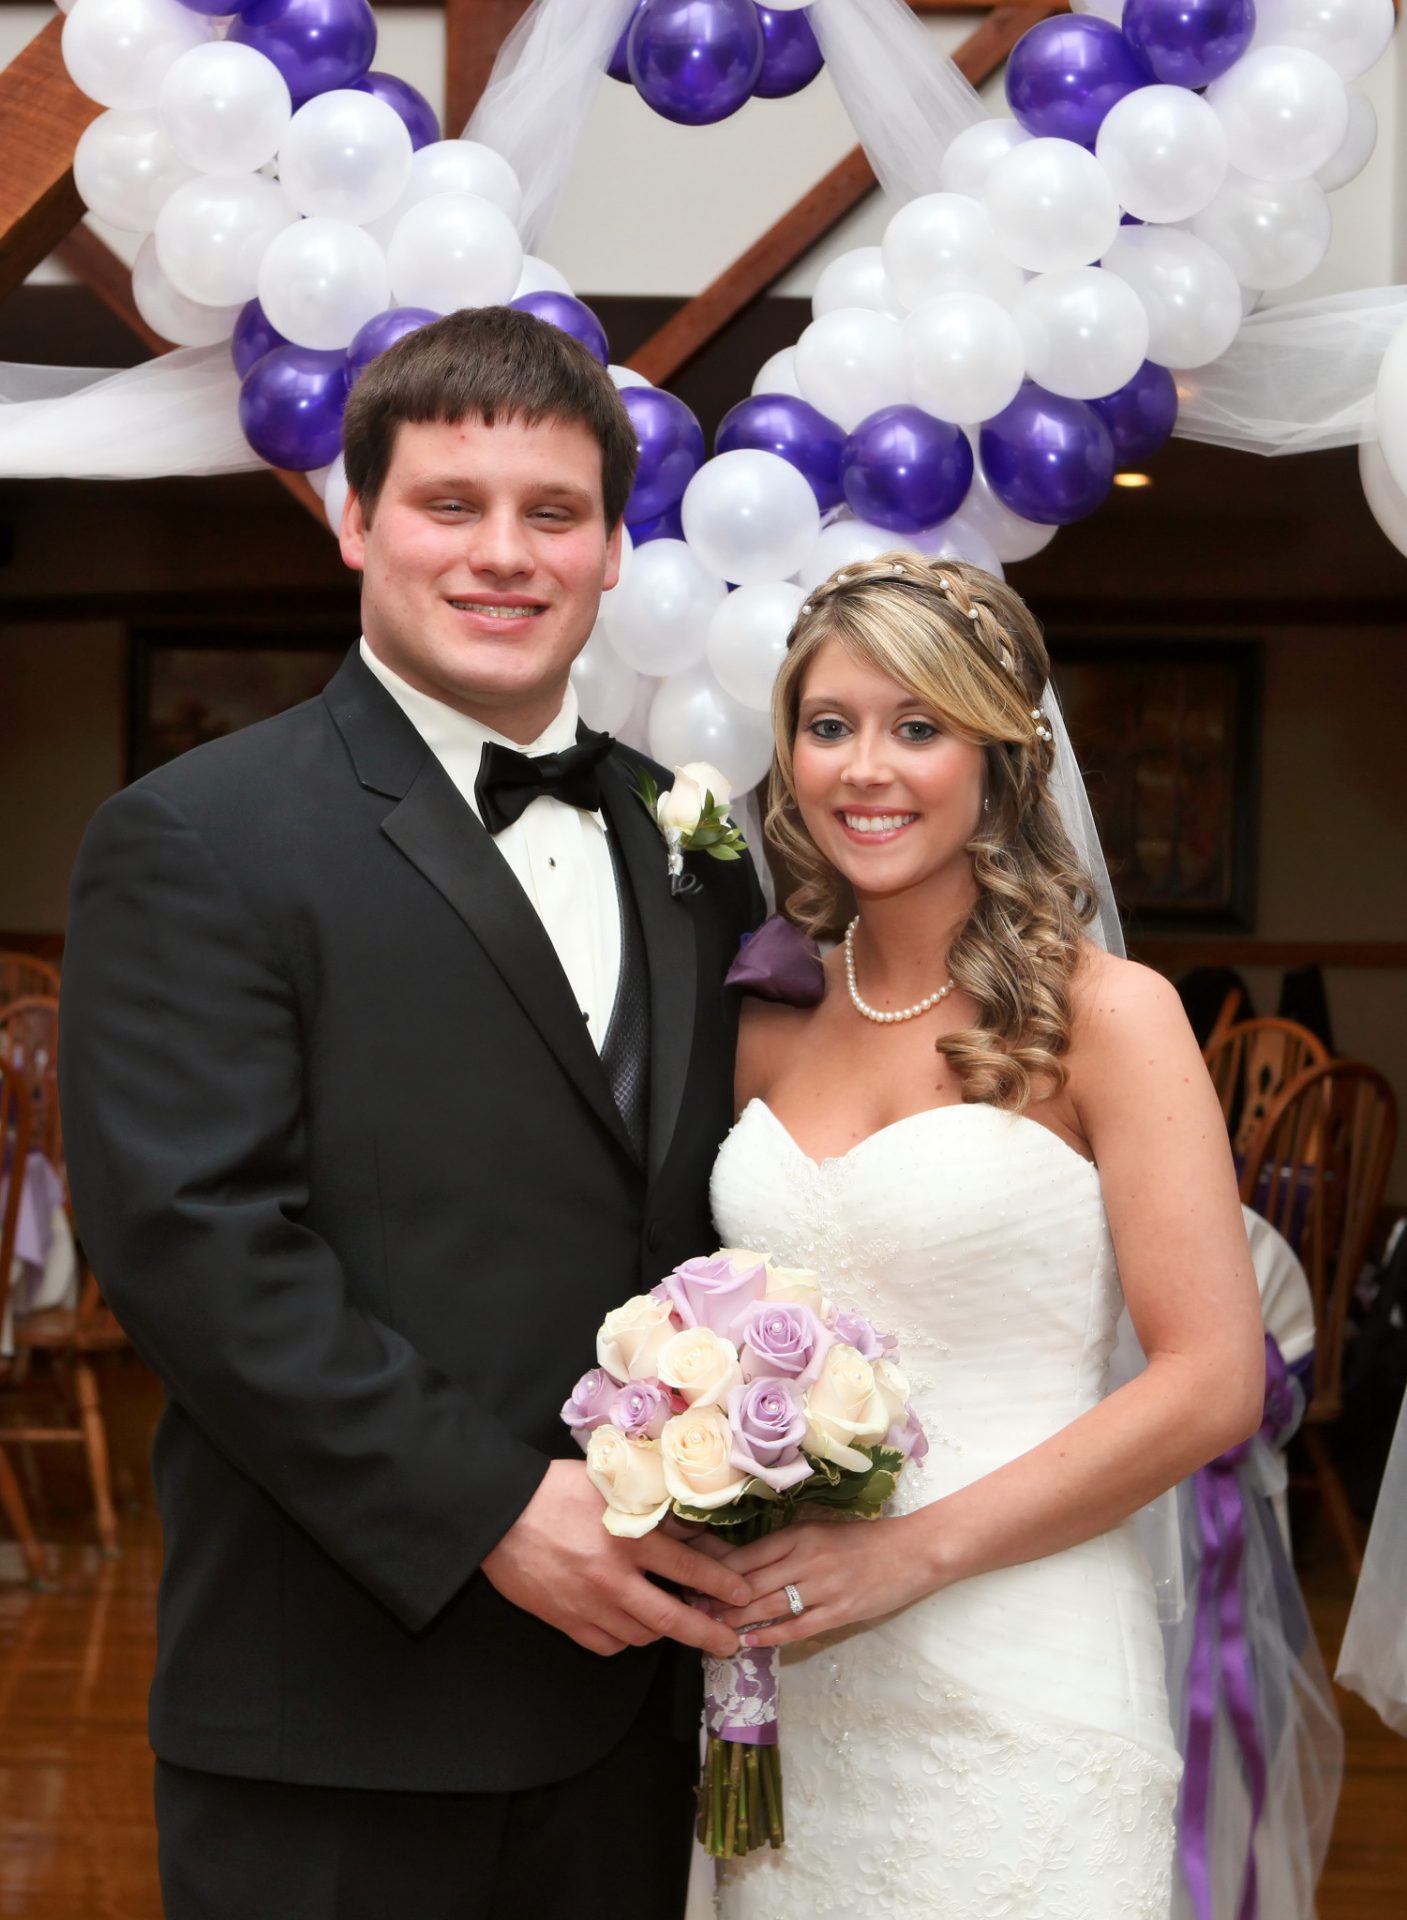 Bride and groom pose in front of white and lavander ballons